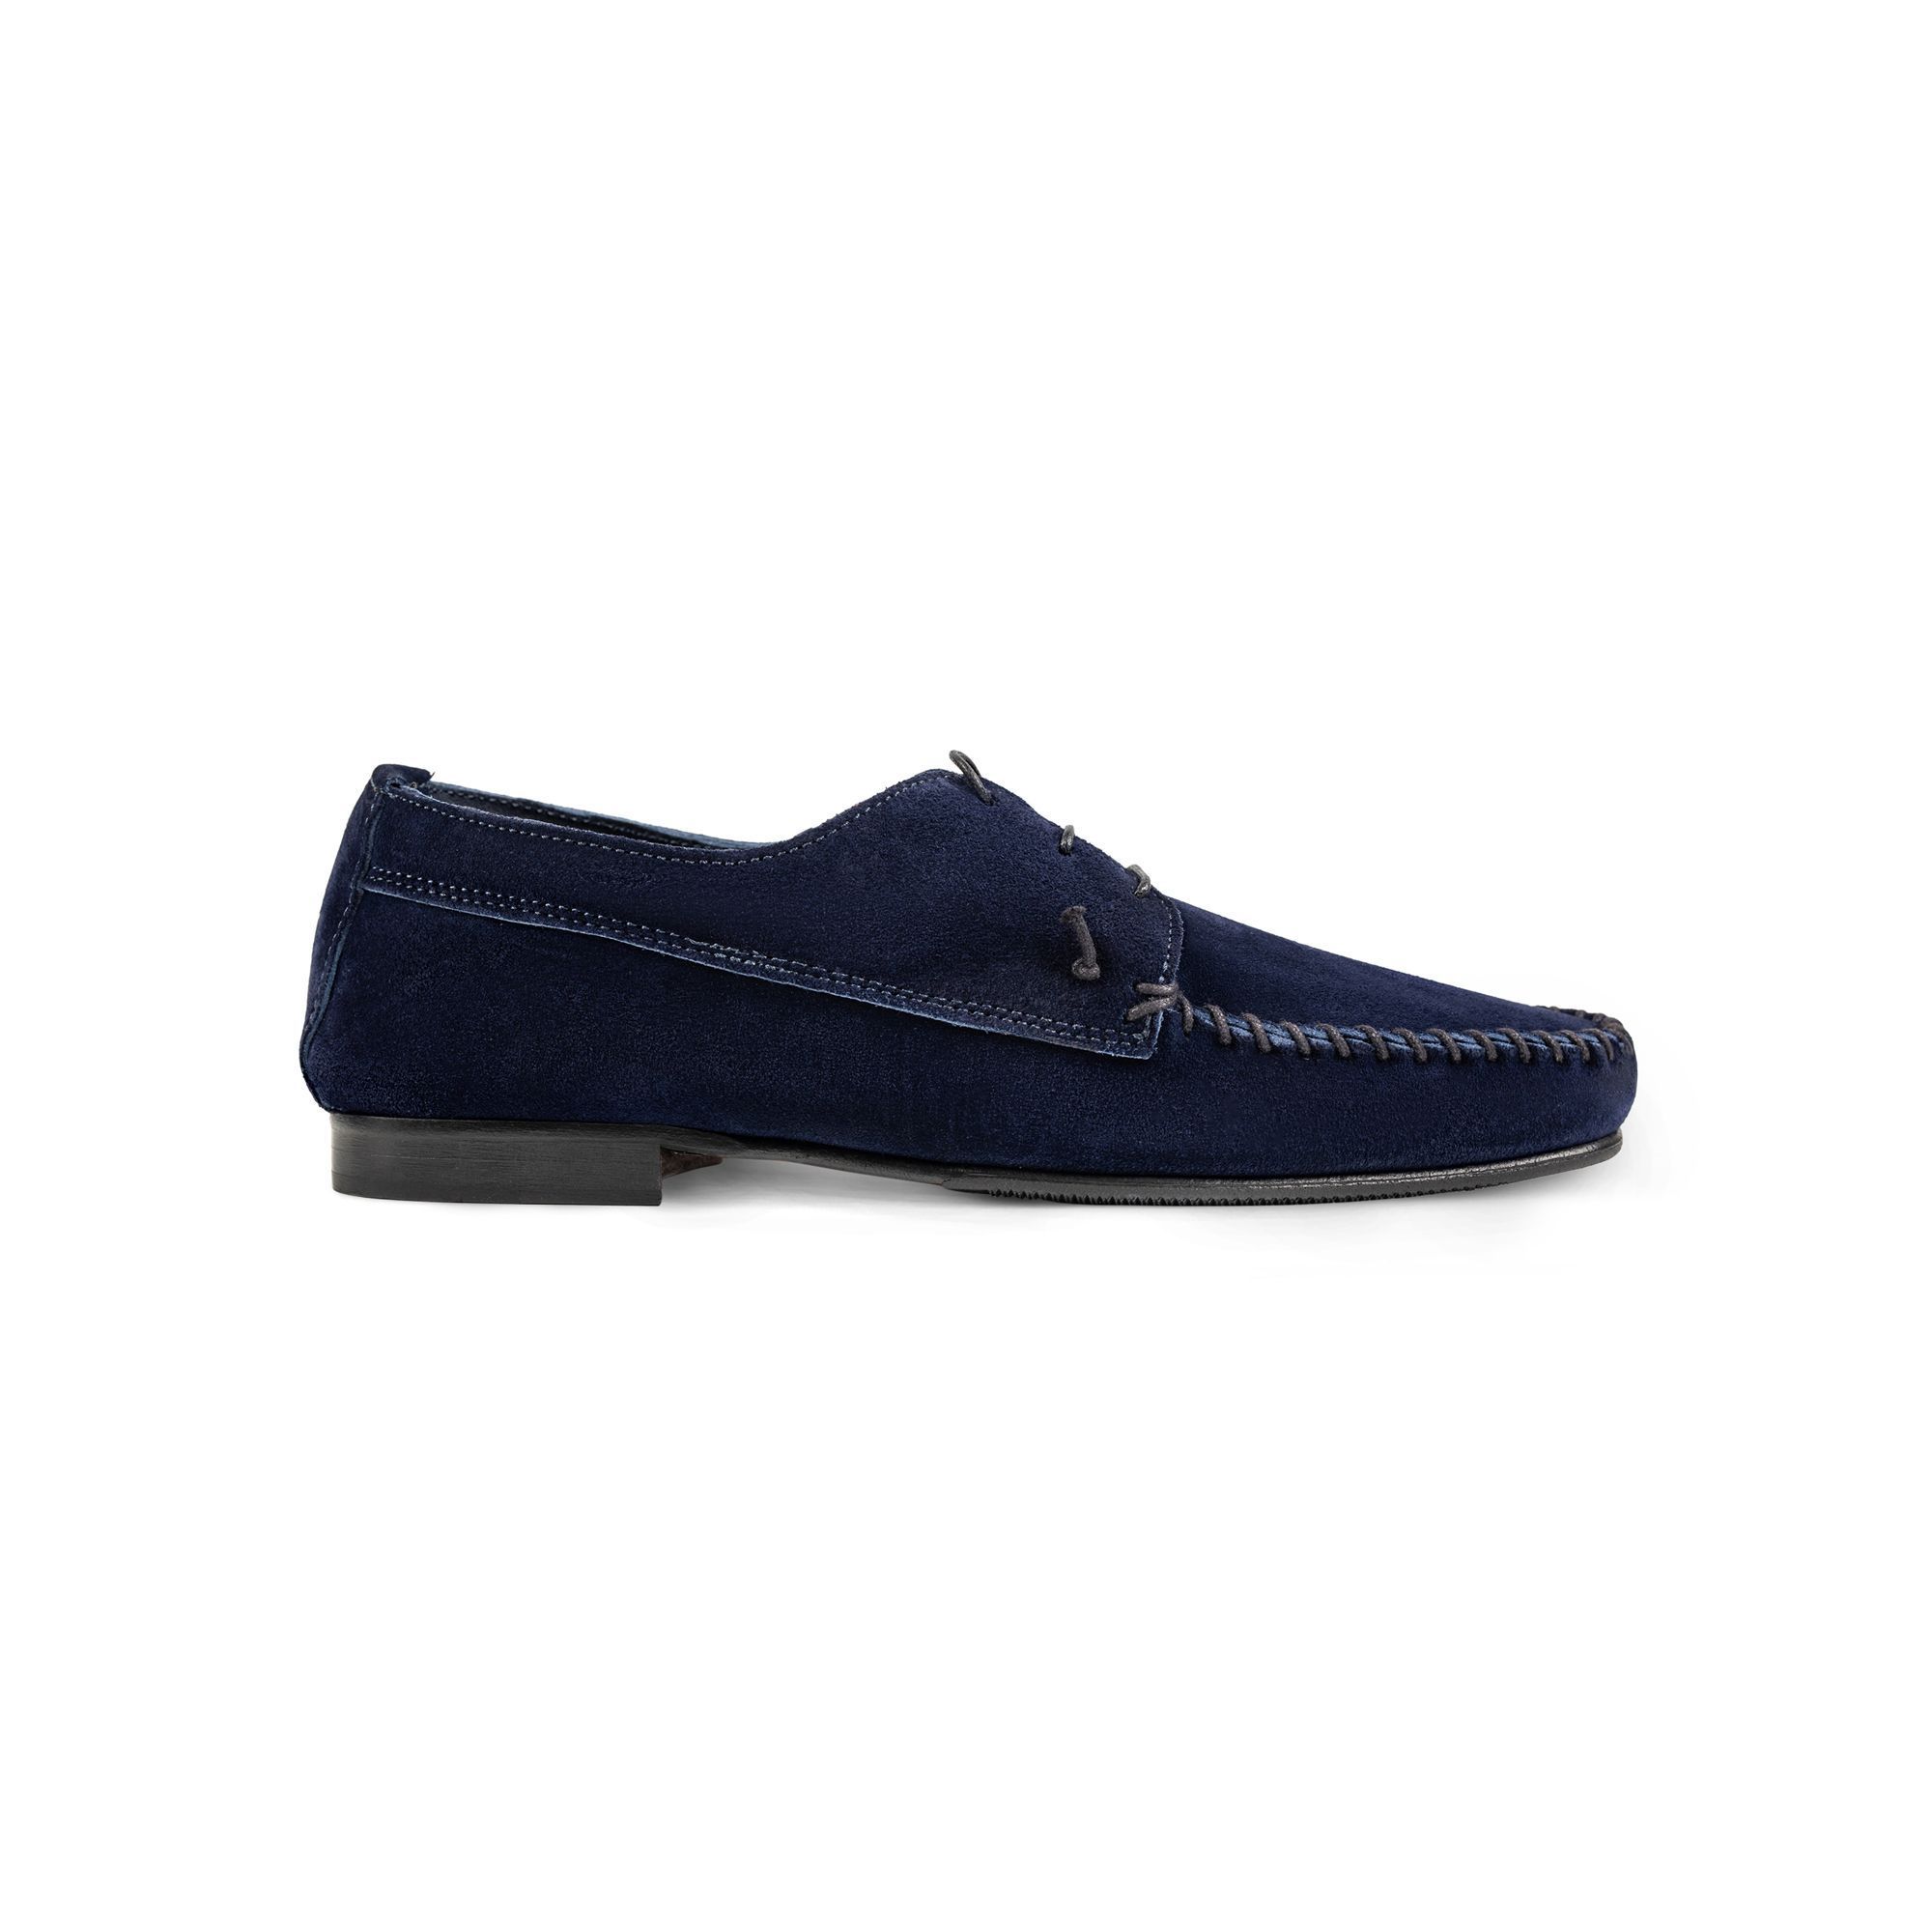 Suede Fexible Handmade Blue Shoes